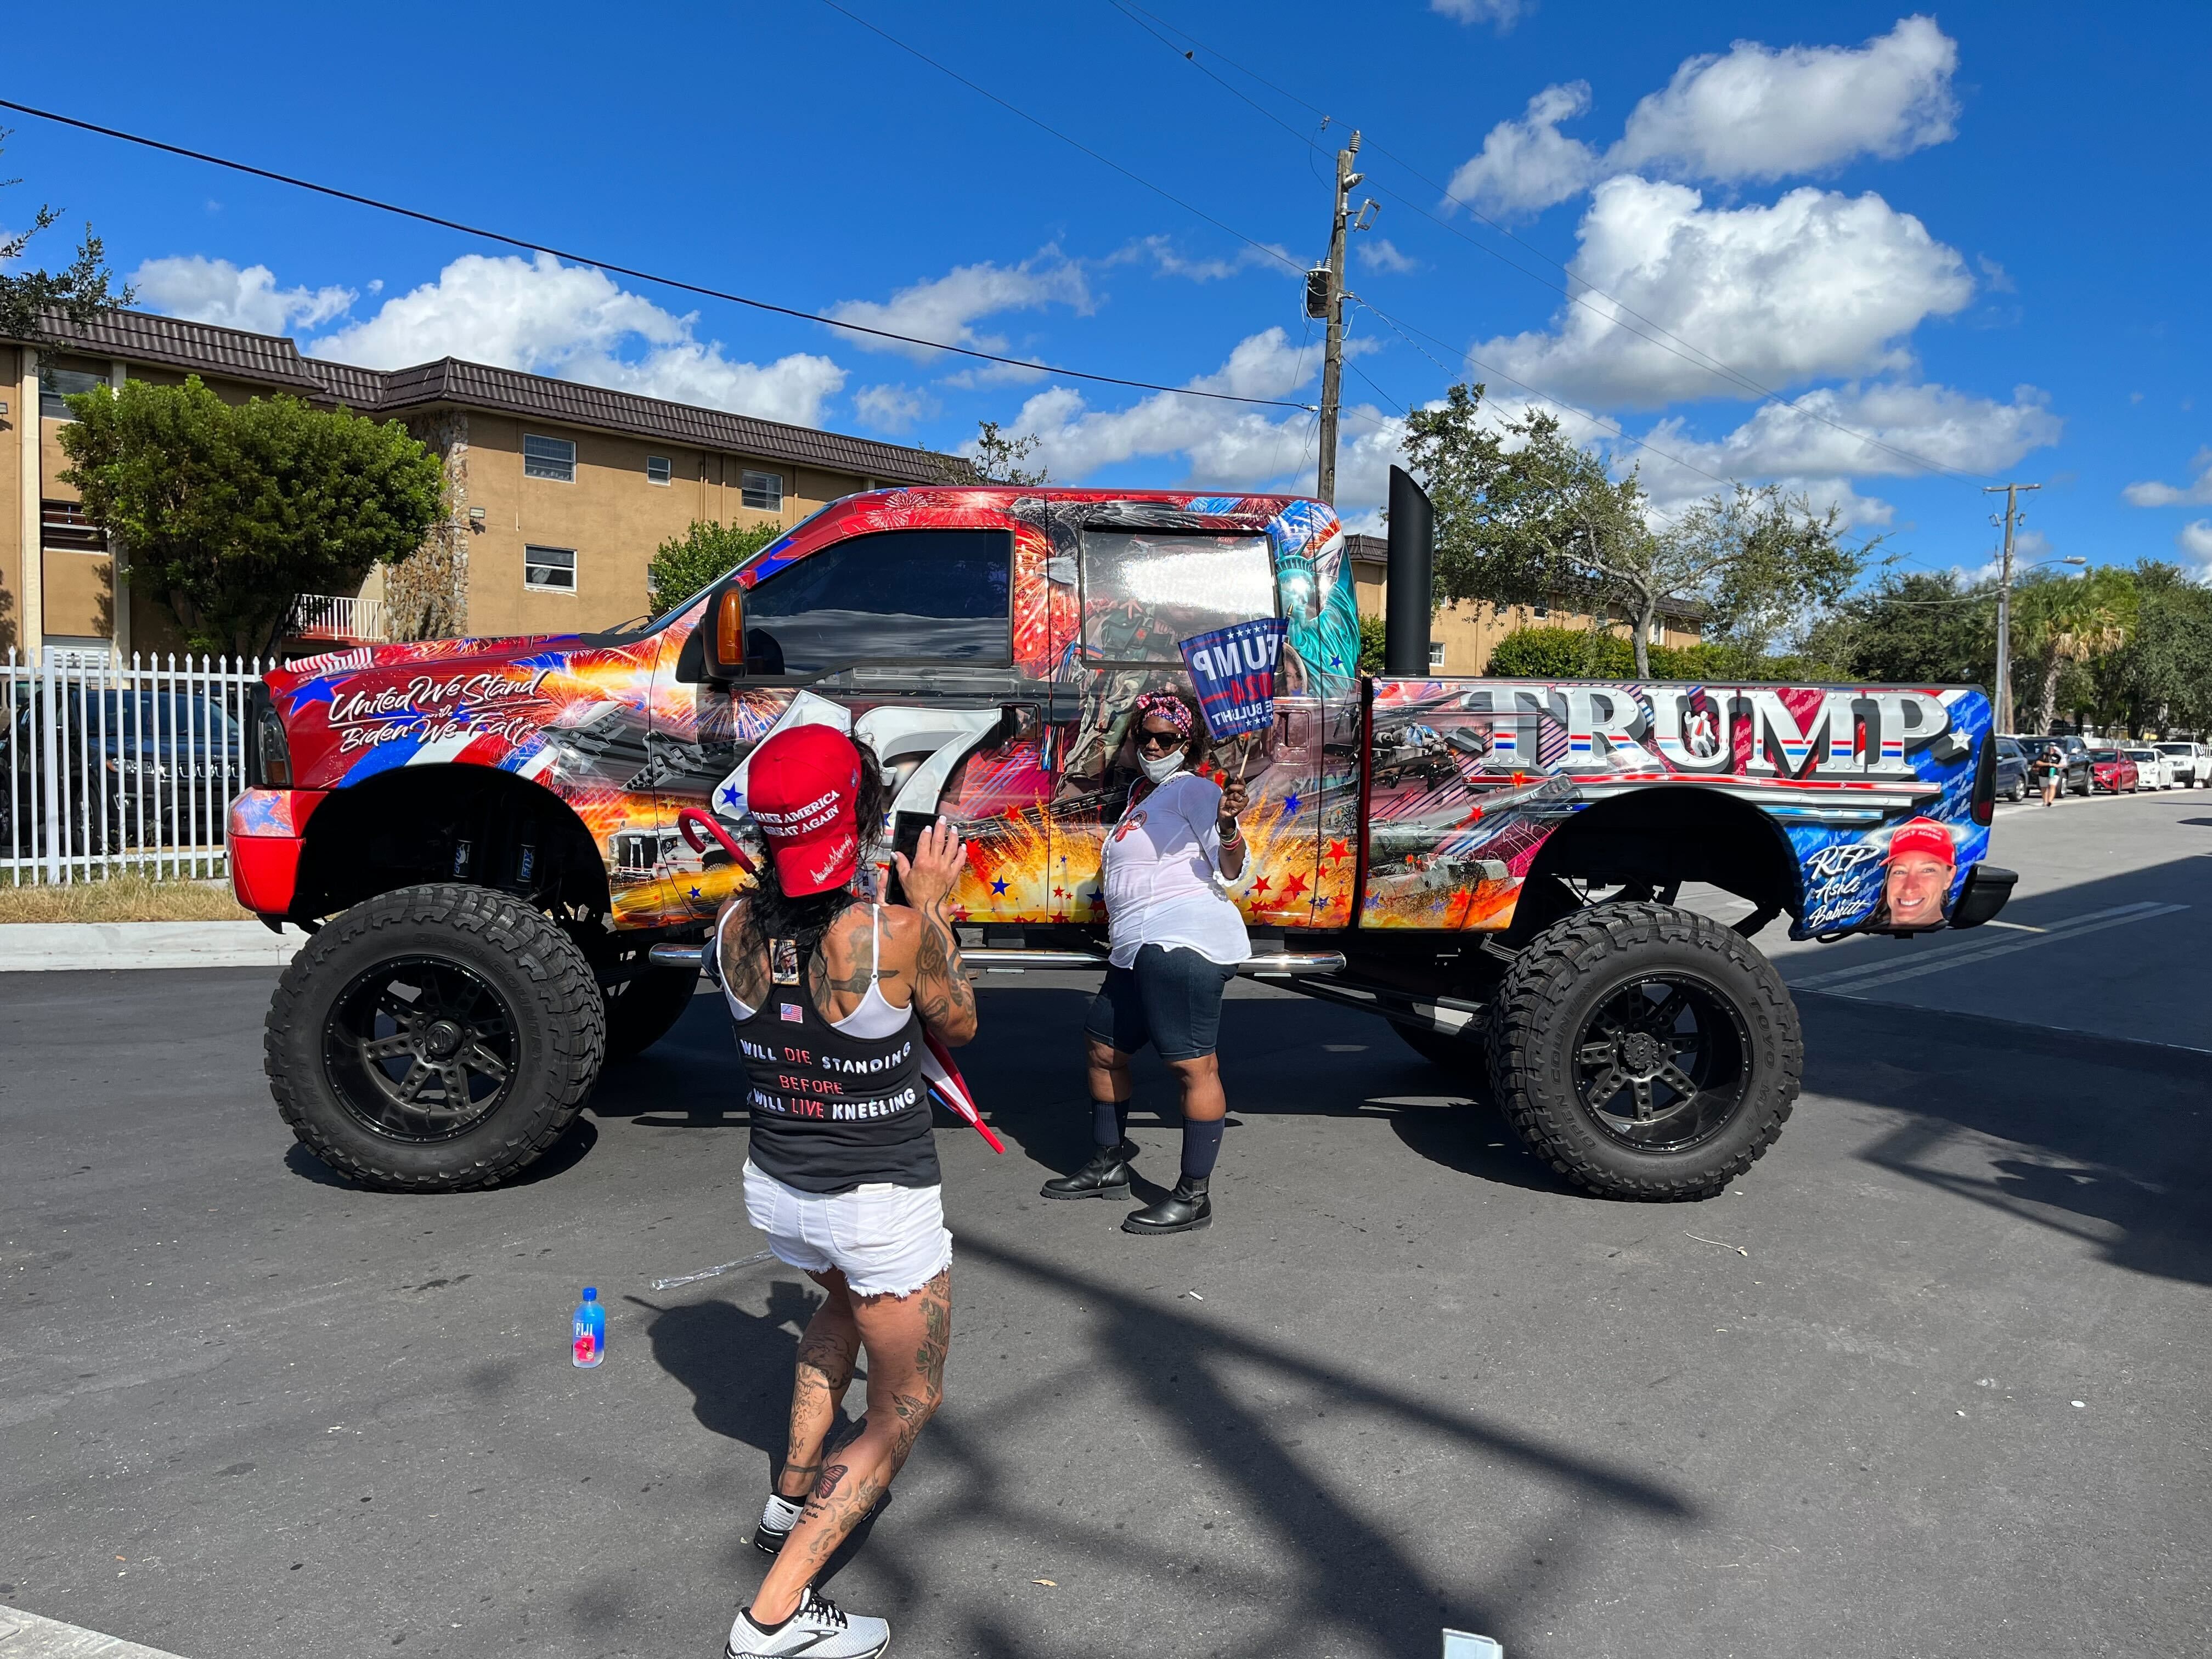 Trump supporters pose in front of a MAGA-themed pickup truck.